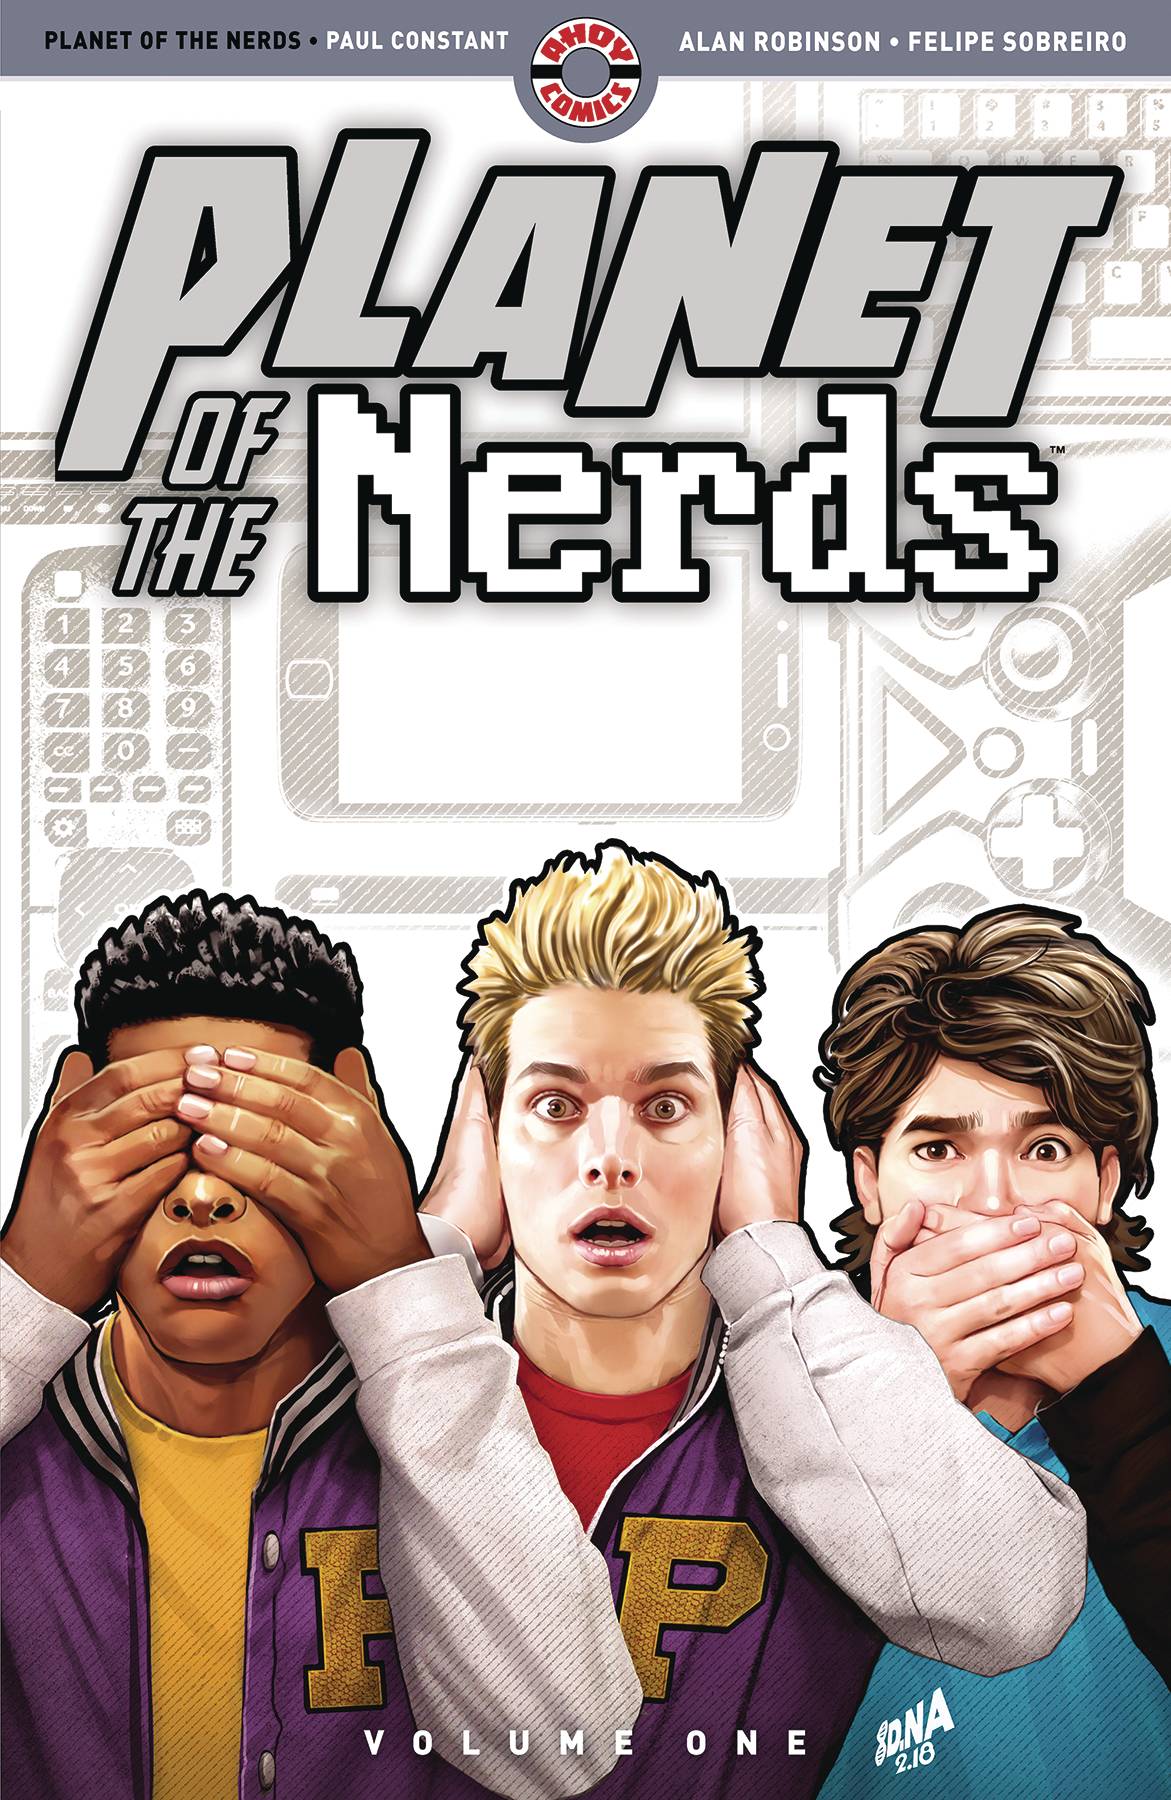 Planet of the Nerds Graphic Novel Volume 1